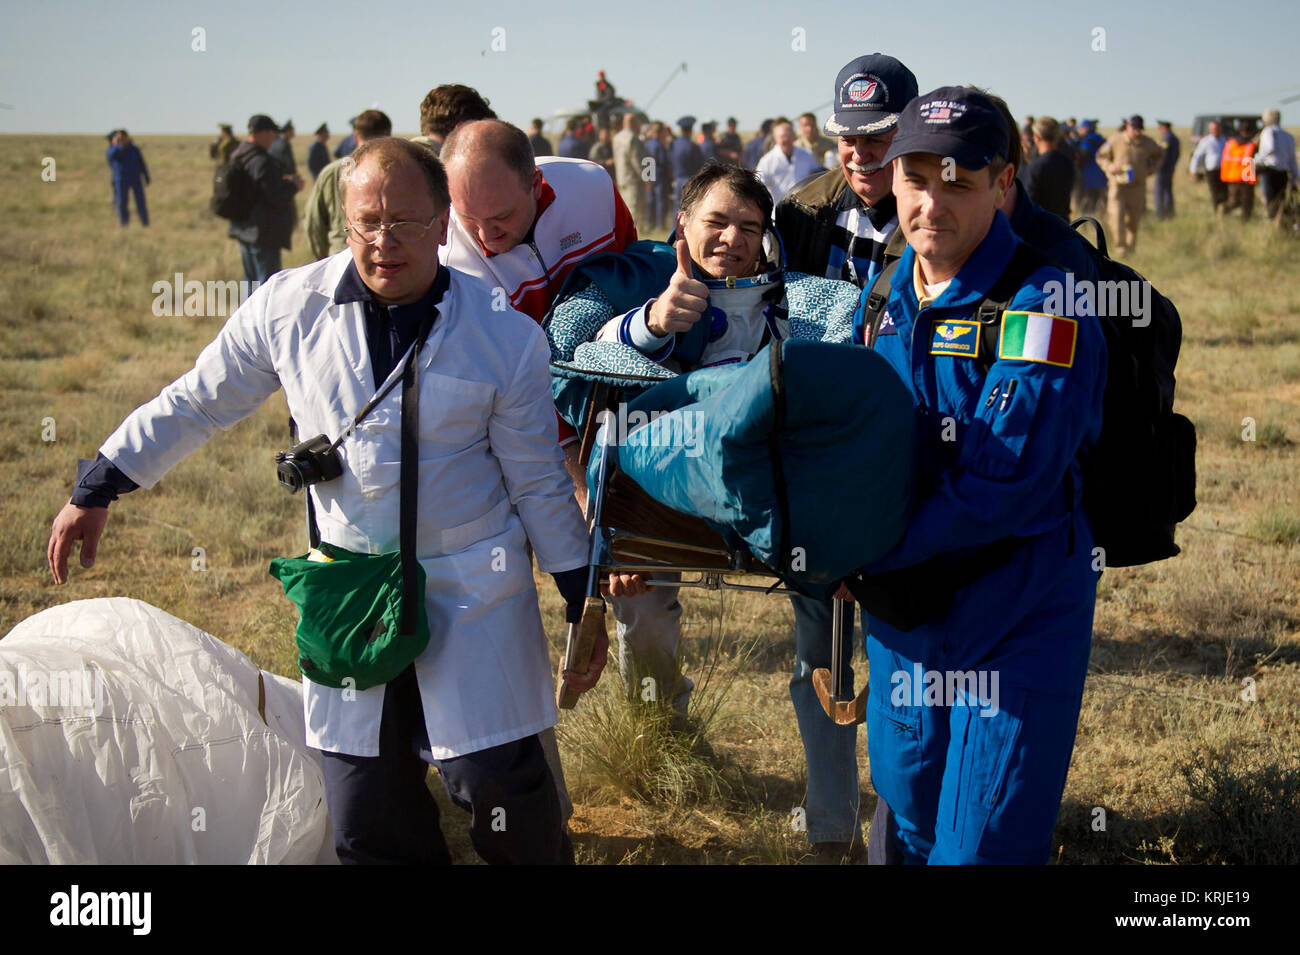 Expedition 27 Flight Engineer Paolo Nespoli gives a thumbs up as he is carried in a chair to the medical tent shortly after he and Commander Dmitry Kondratyev and Flight Engineer Cady Coleman landed in their Soyuz TMA-20 southeast of the town of Zhezkazgan, Kazakhstan, on Tuesday, May 24, 2011.  NASA Astronaut Coleman, Russian Cosmonaut Kondratyev and Italian Astronaut Nespoli are returning from more than five months onboard the International Space Station where they served as members of the Expedition 26 and 27 crews. Photo Credit: (NASA/Bill Ingalls) Soyuz TMA-20 Paolo Nespoli shortly after  Stock Photo